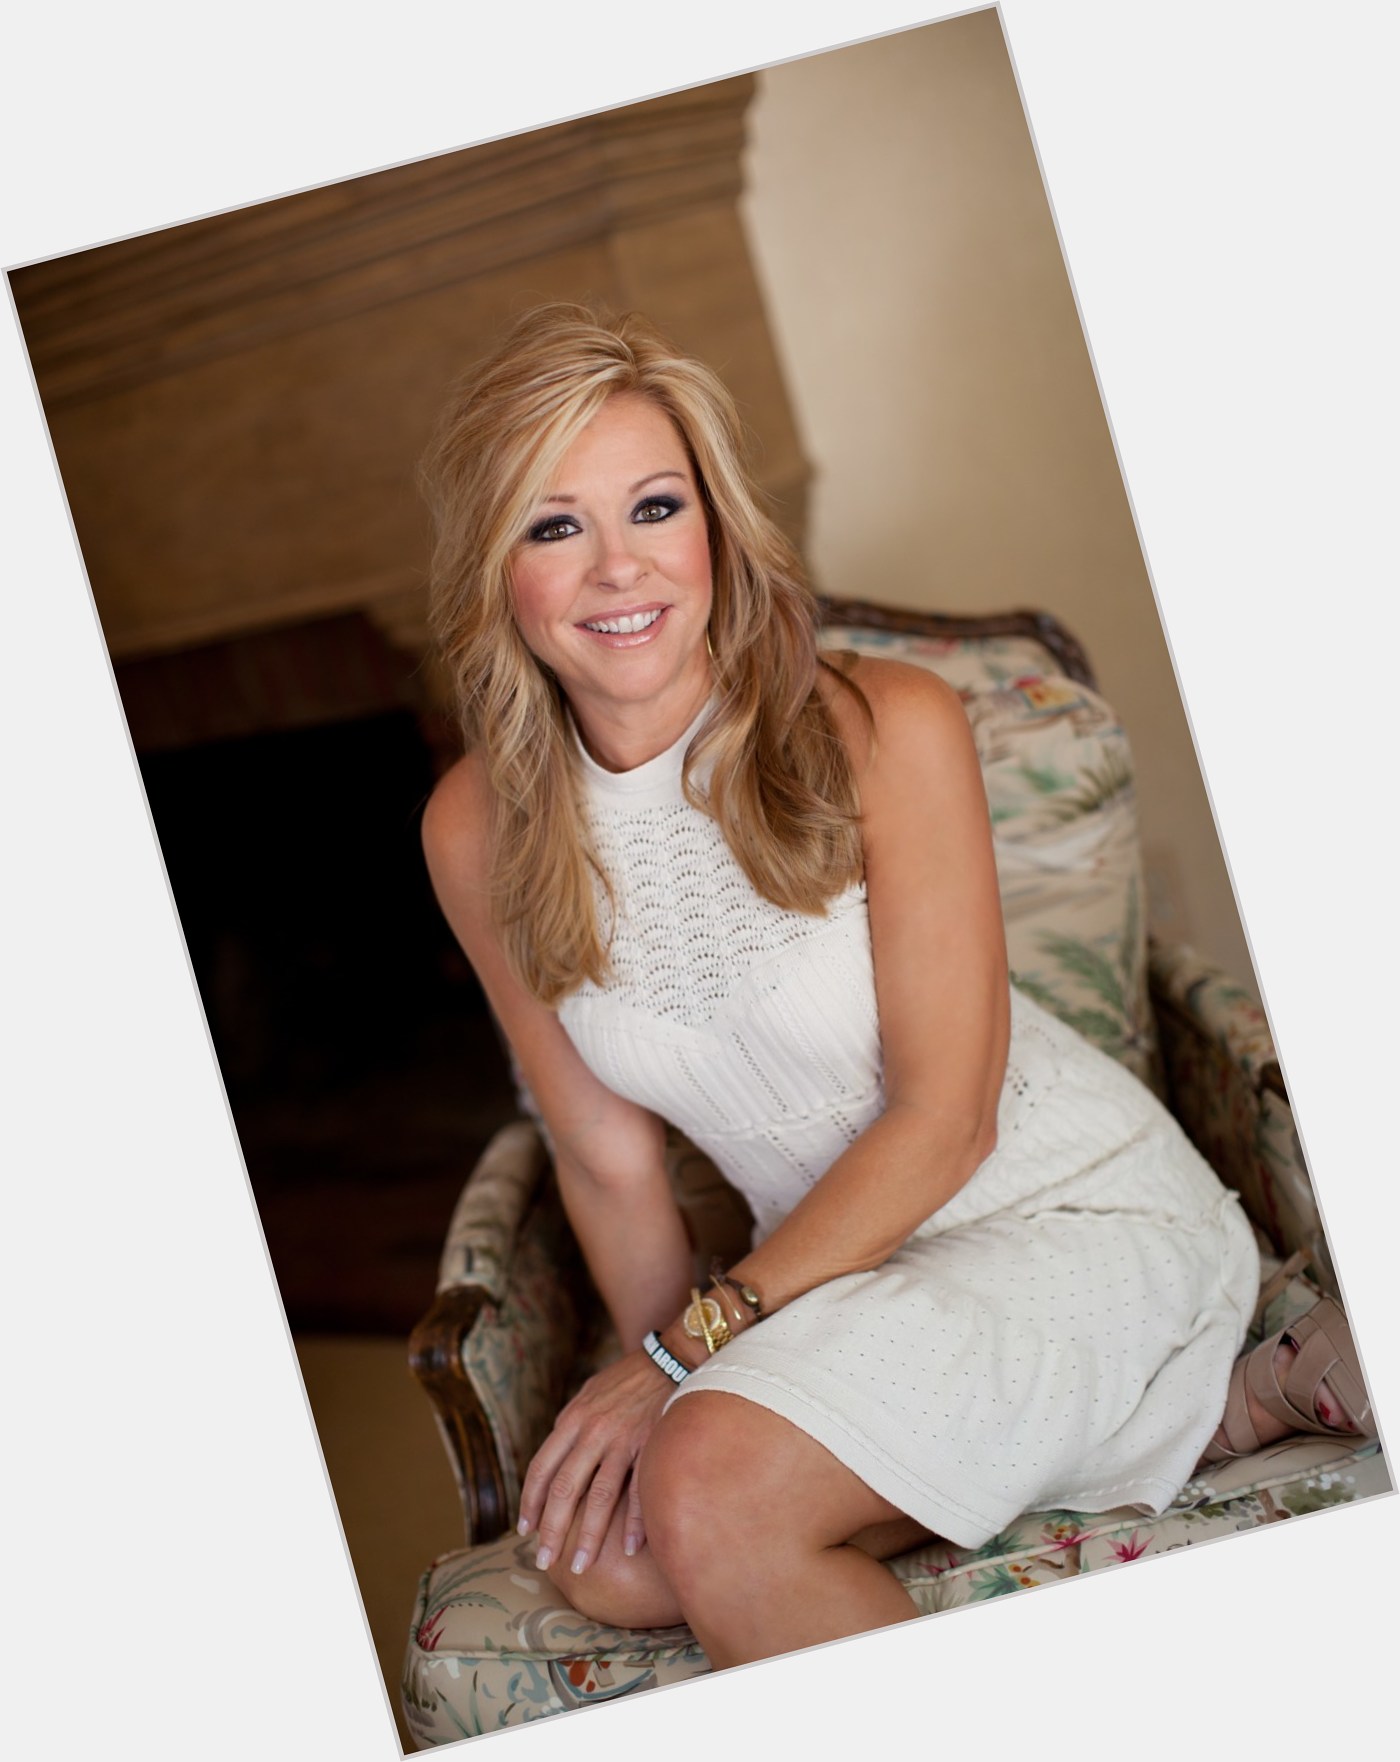 Https://fanpagepress.net/m/L/Leigh Anne Tuohy Dating 2